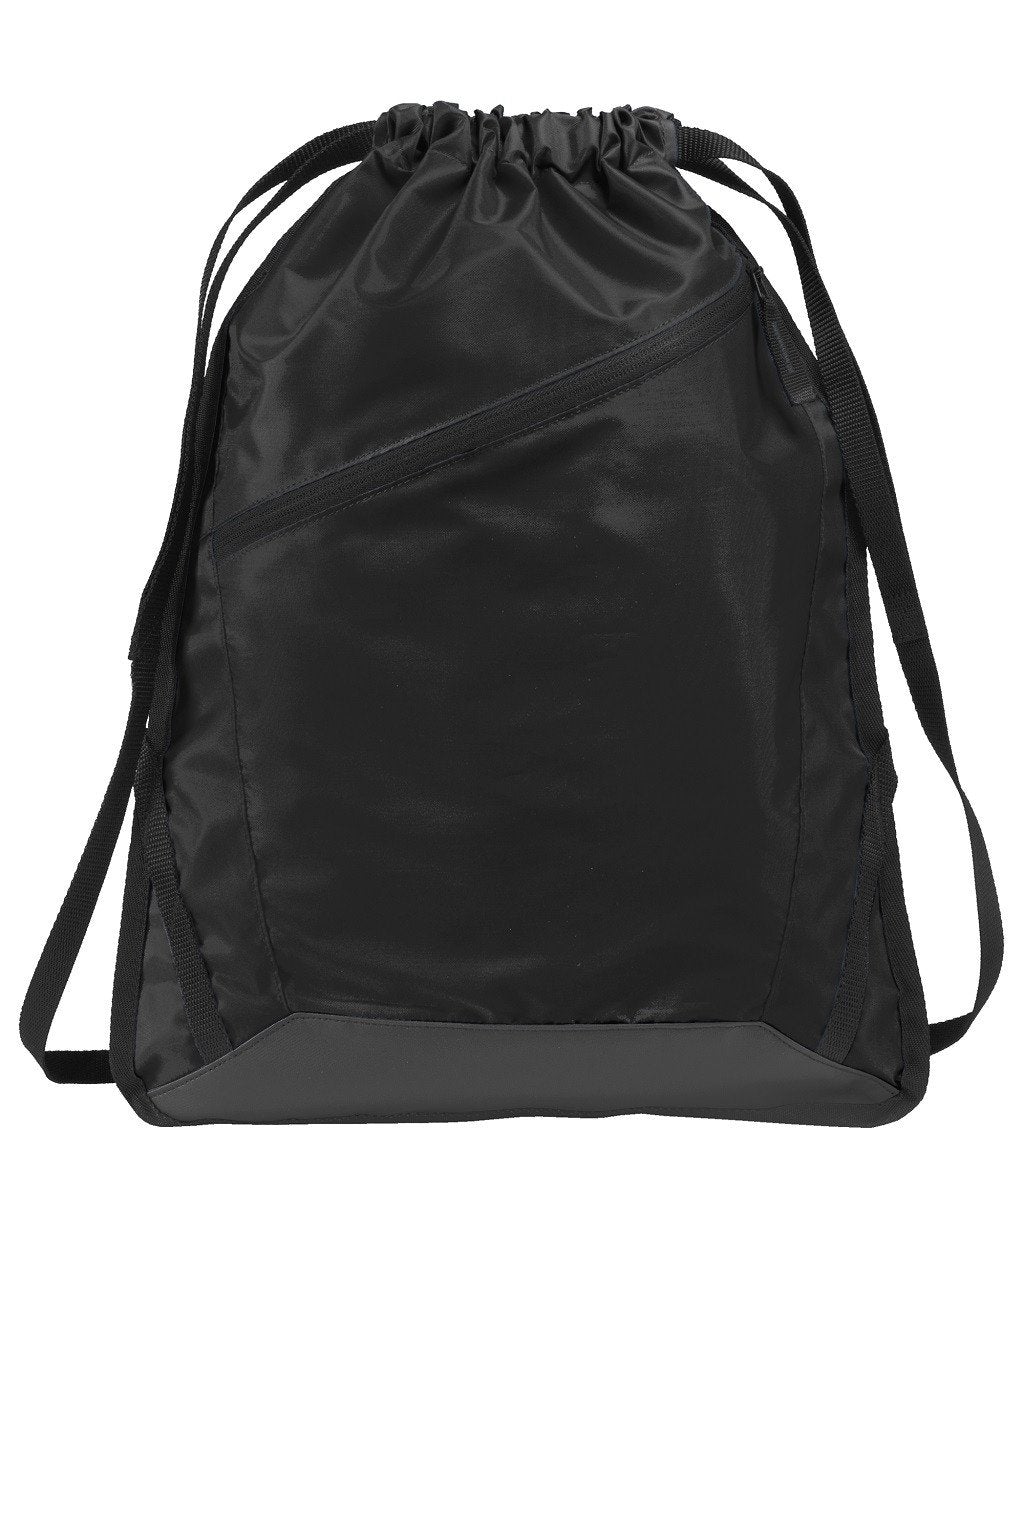 Closeout Zip-It Drawstring Backpack with Adjustable Straps